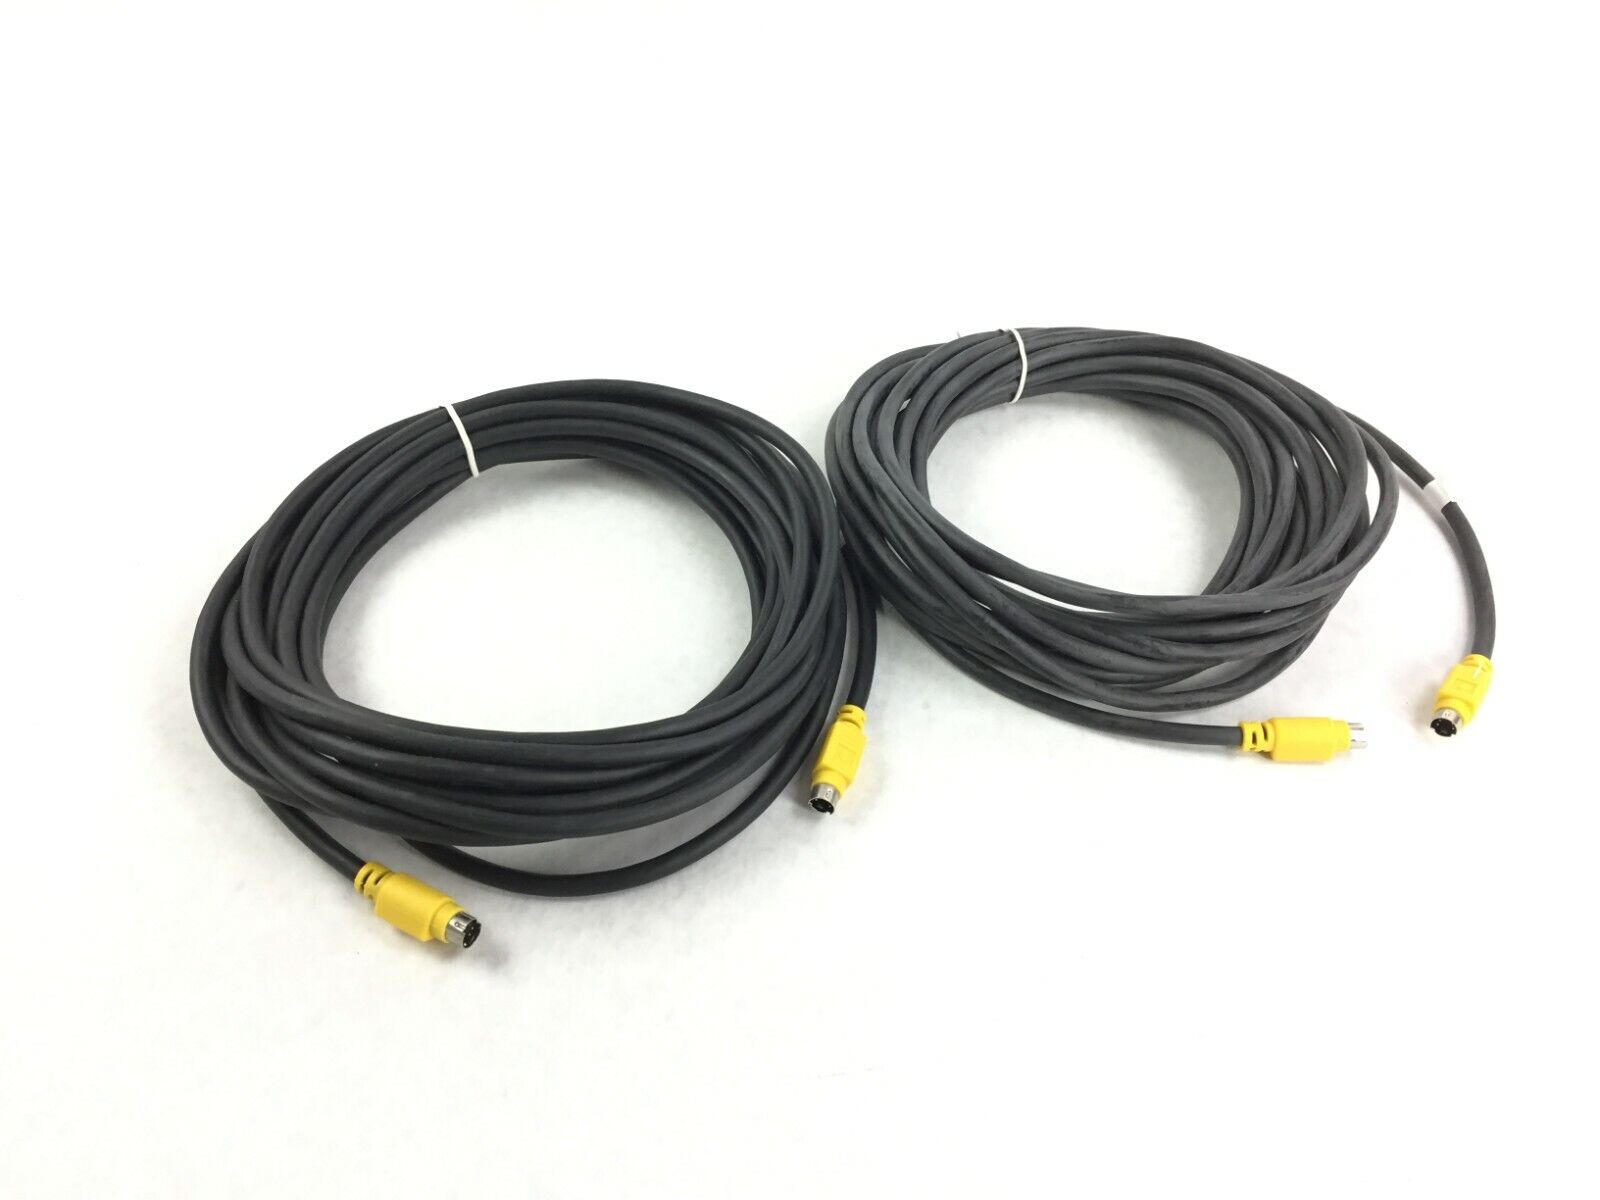 Polycom 08409-001 25 Feet S-Video Cable for Document Camera Lot Of (2)